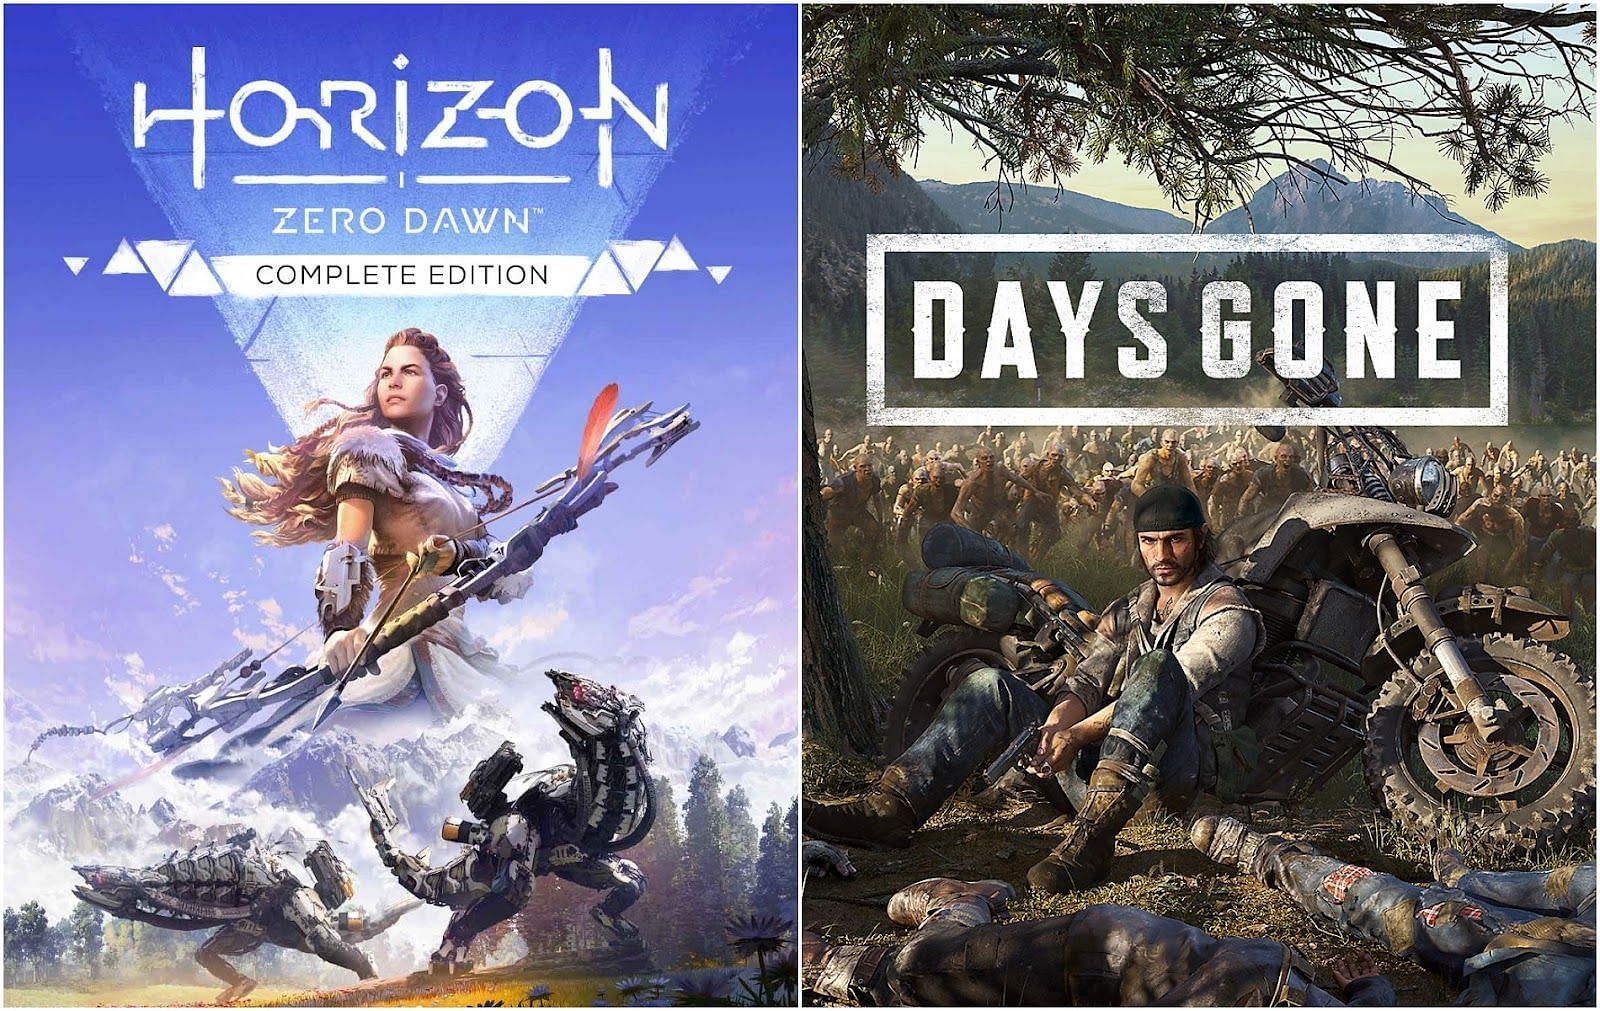 The prices of the Horizon Zero Dawn and Days Gone PC ports have increased on Steam and the Epic Games Store in India (Image by PlayStation)